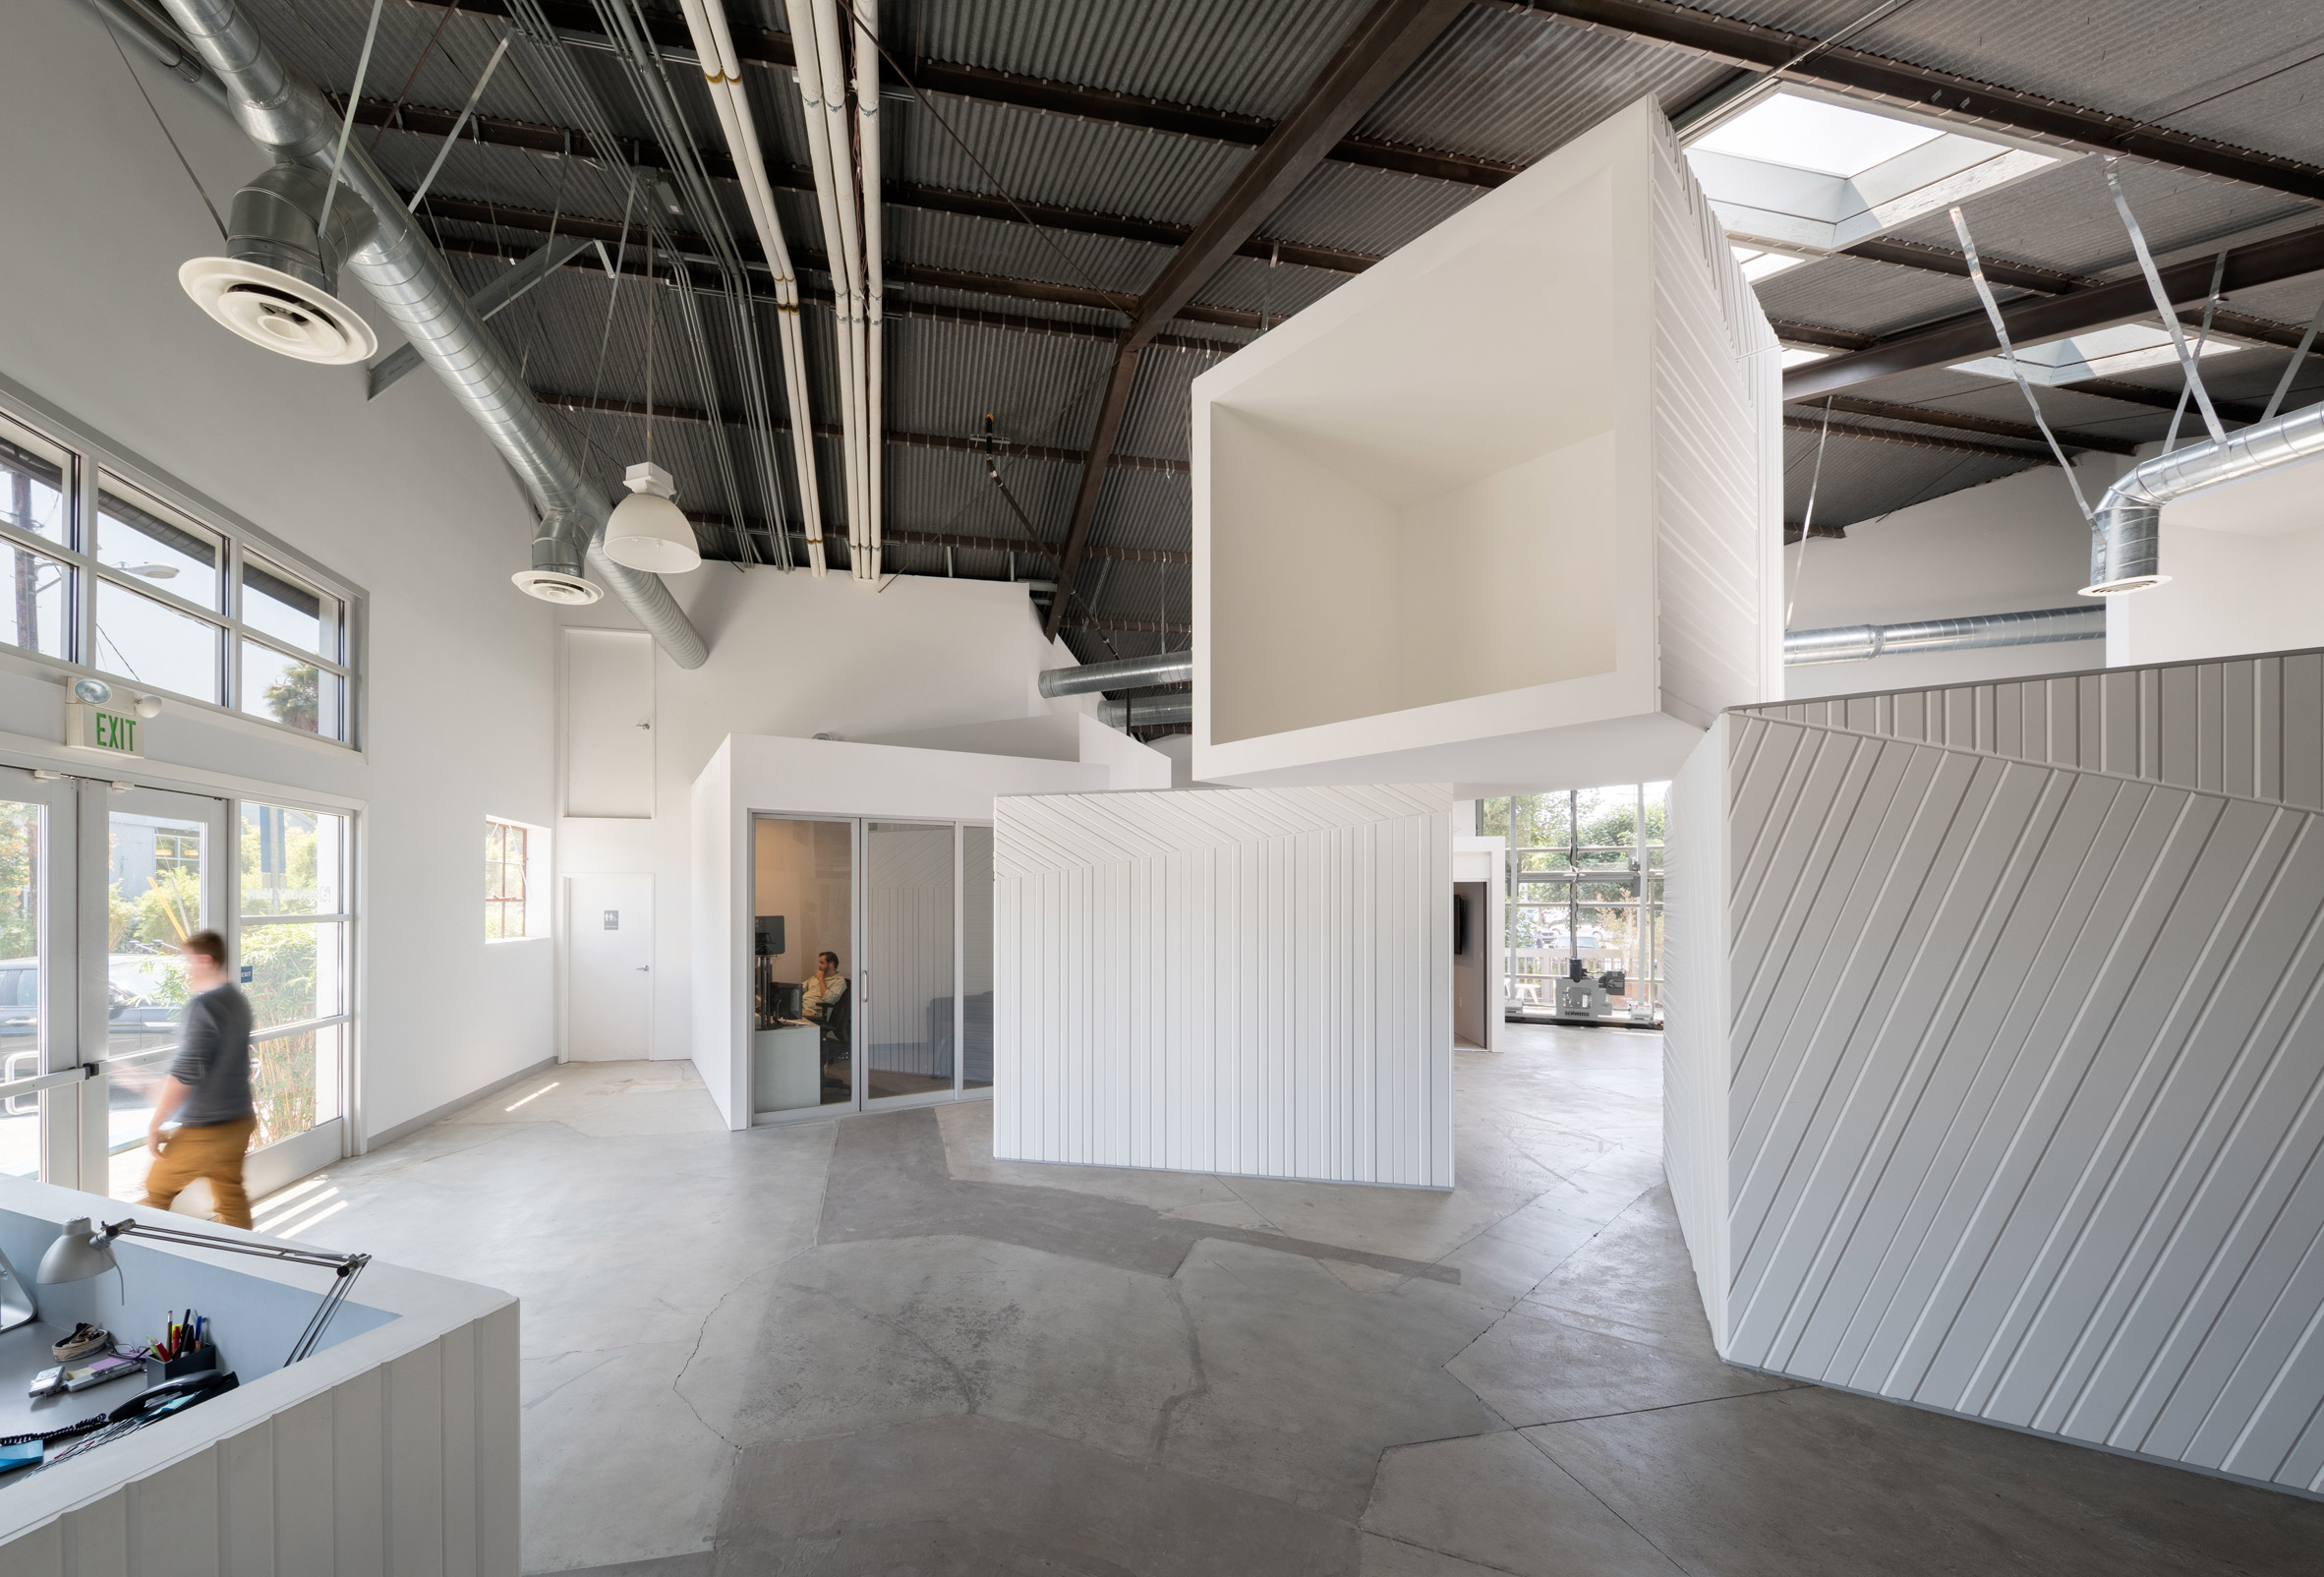 Massive white boxes turn LA warehouse into offices by FreelandBuck